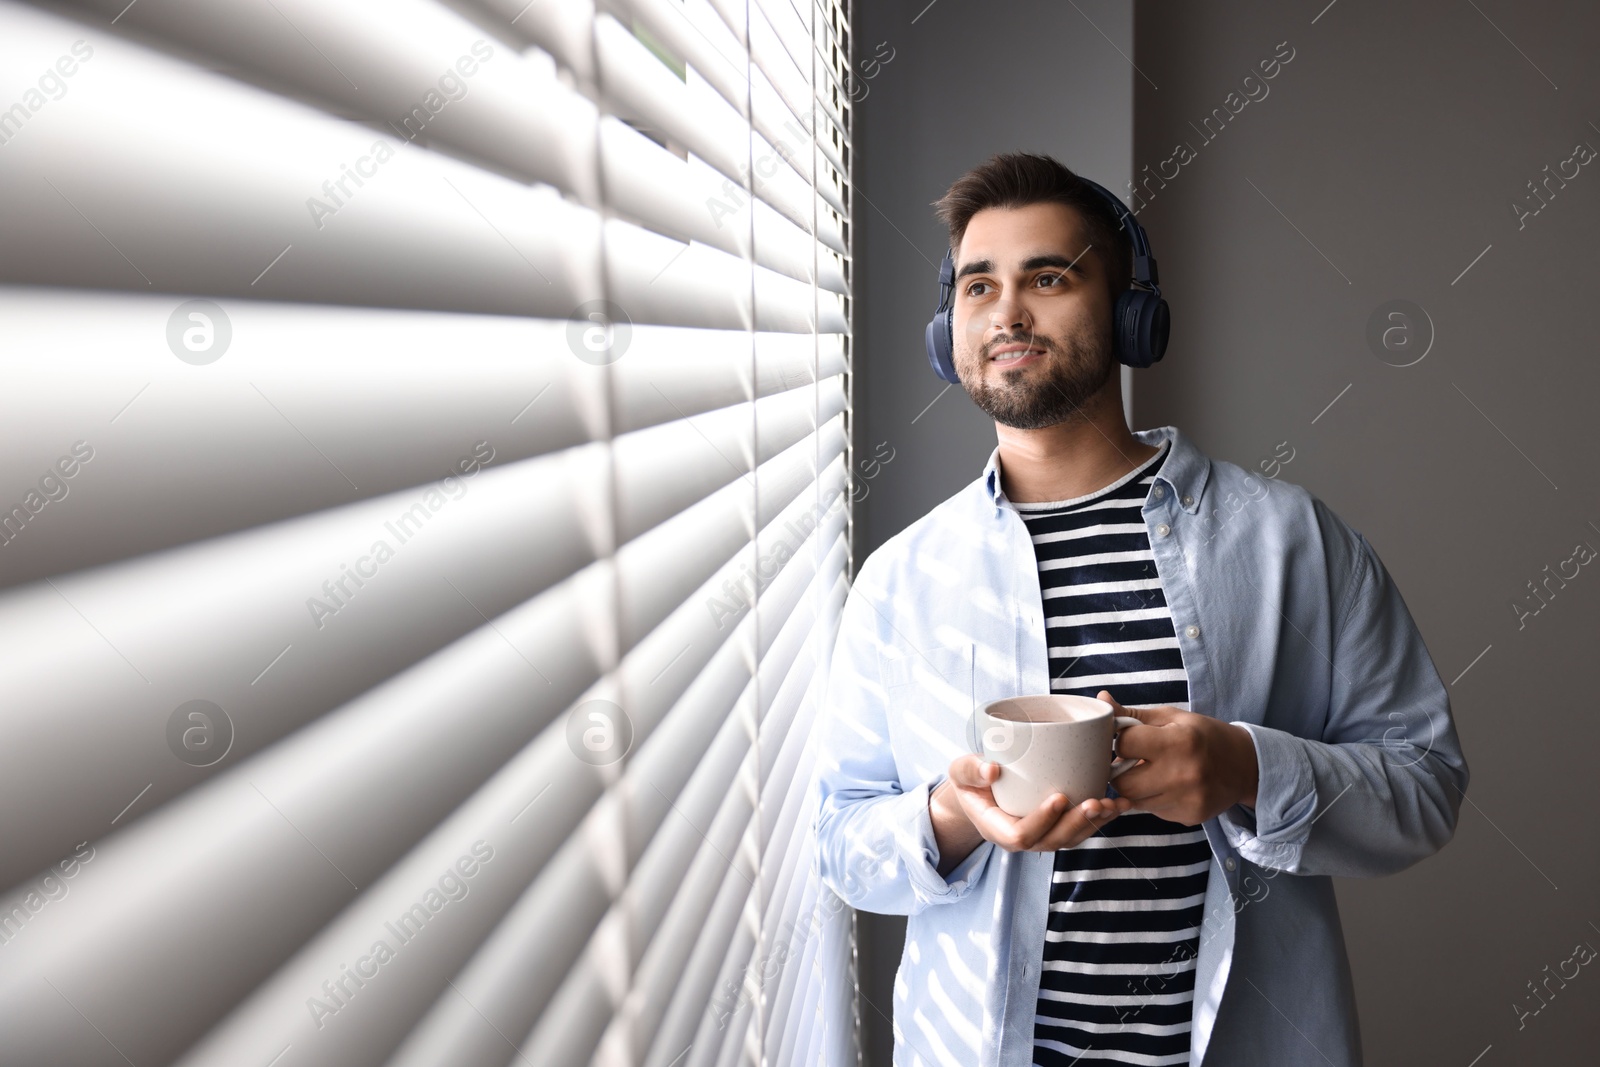 Photo of Man with headphones and cup of drink listening to music near window blinds at home, space for text